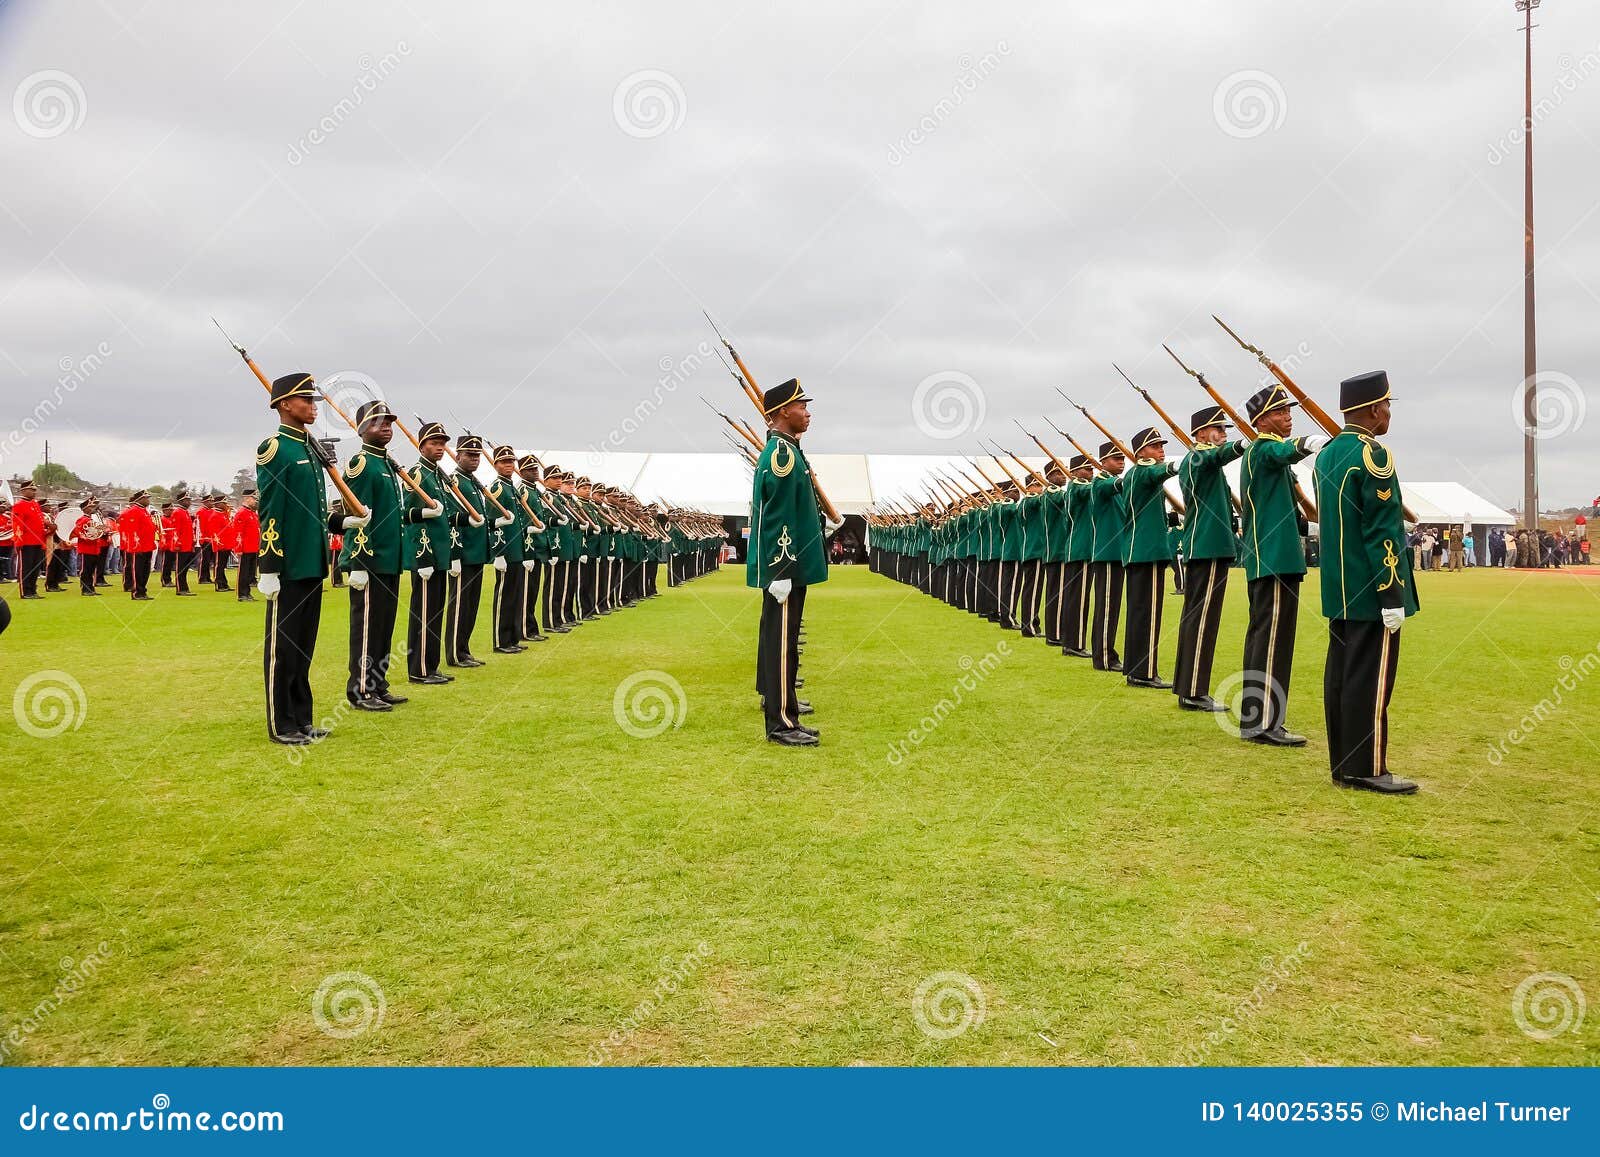 South African Defence Force Soldiers on Parade Editorial Image - Image ...